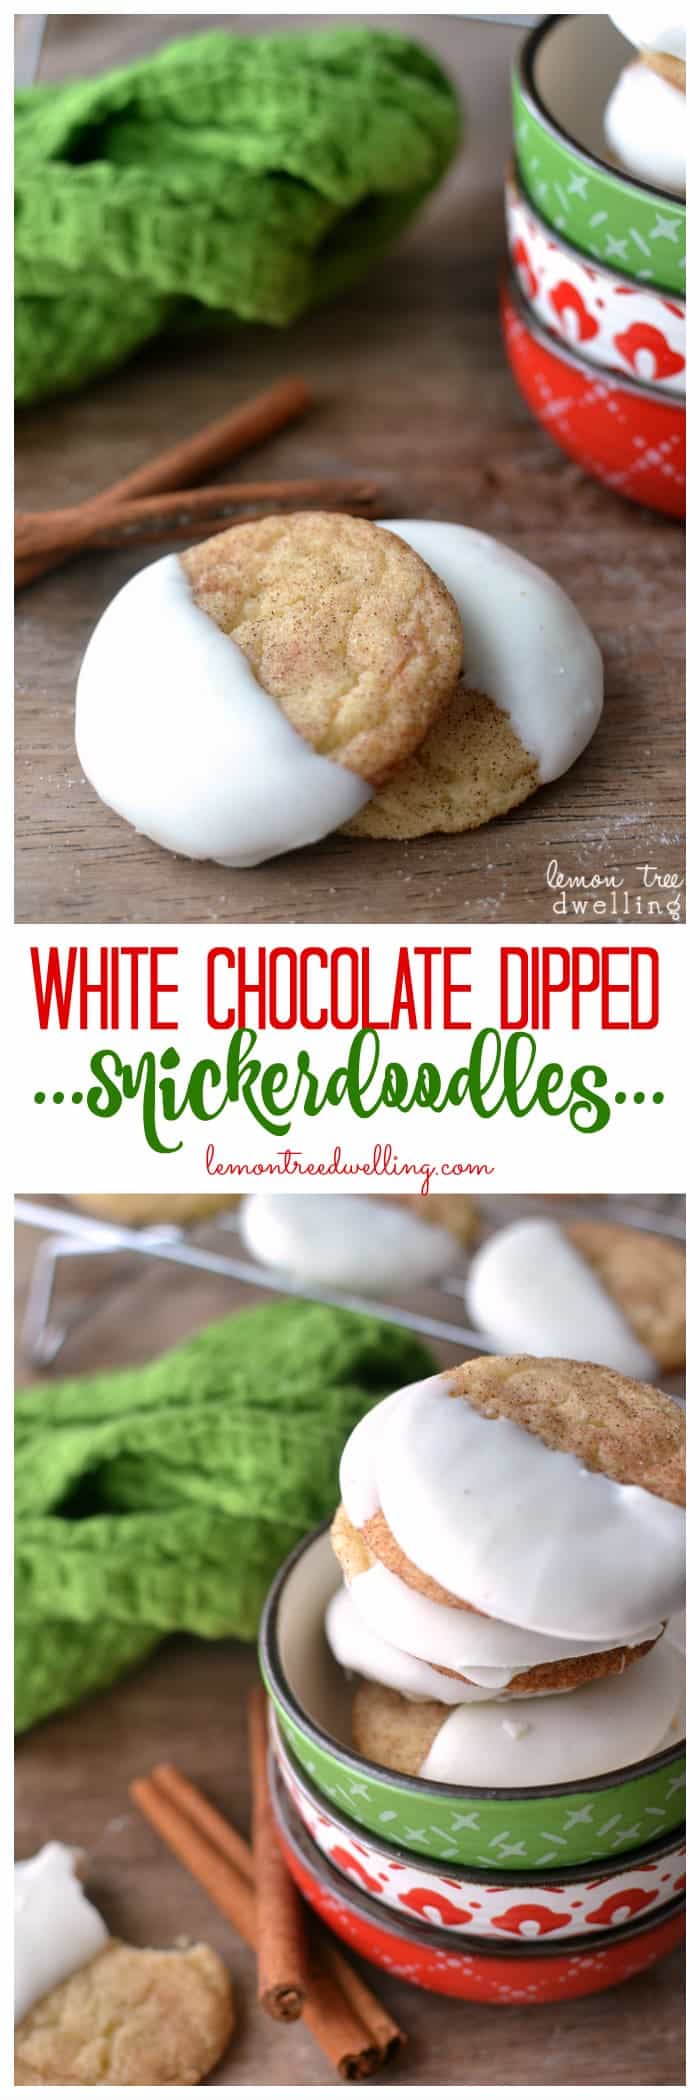 White Chocolate Dipped Snickerdoodles - a delicious twist on one of my favorite Christmas cookies! 